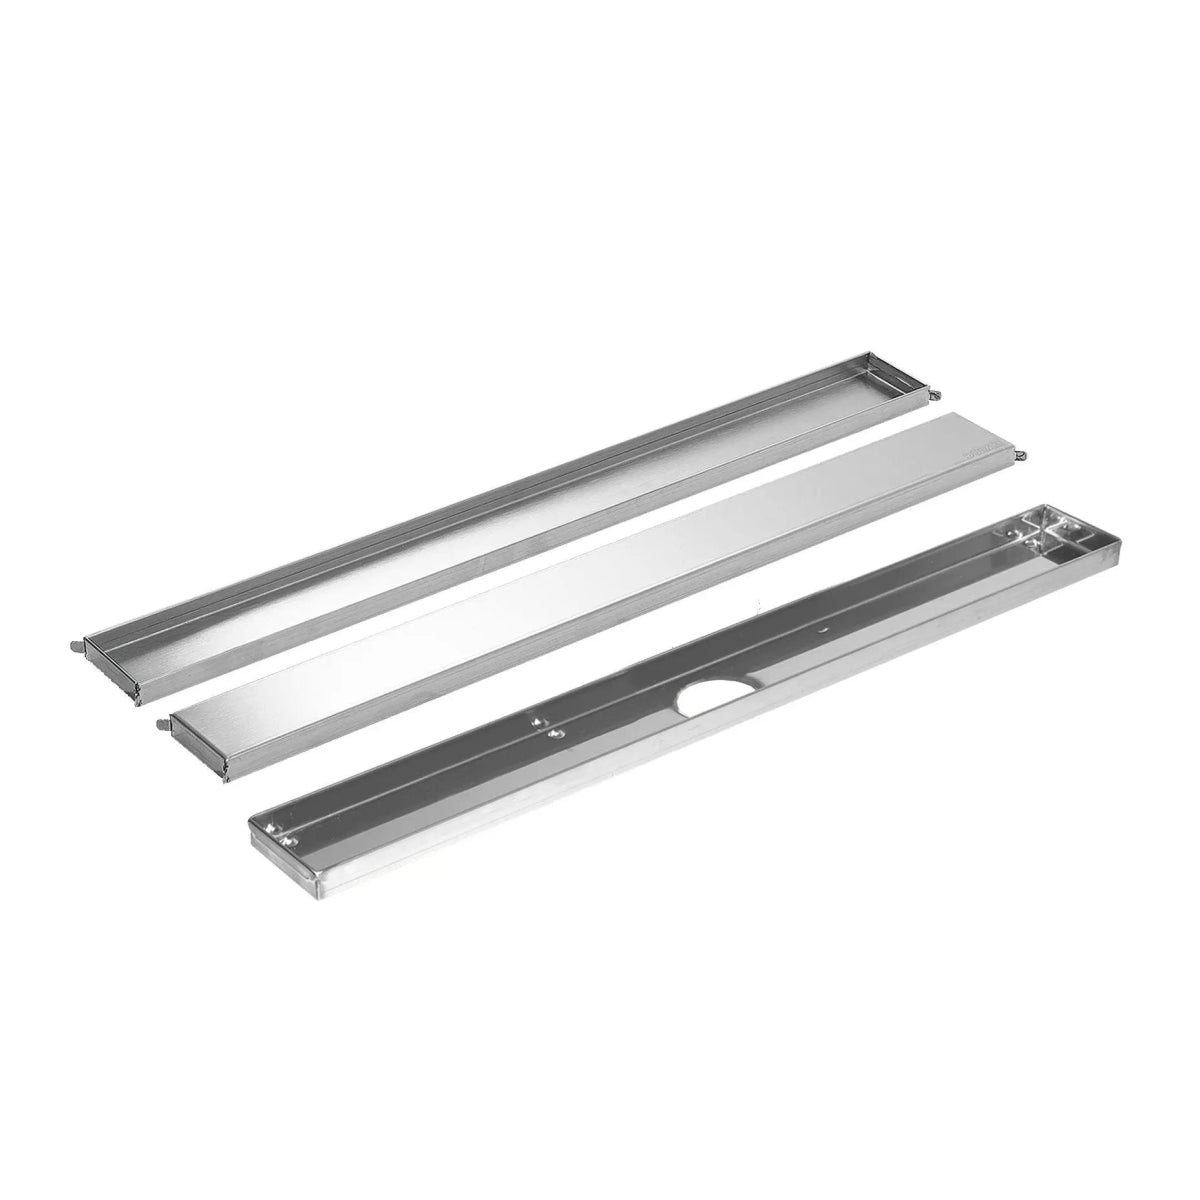 VLMD Drain Channel and Design Grate Doubleface Stainless Steel Brushed - Dural